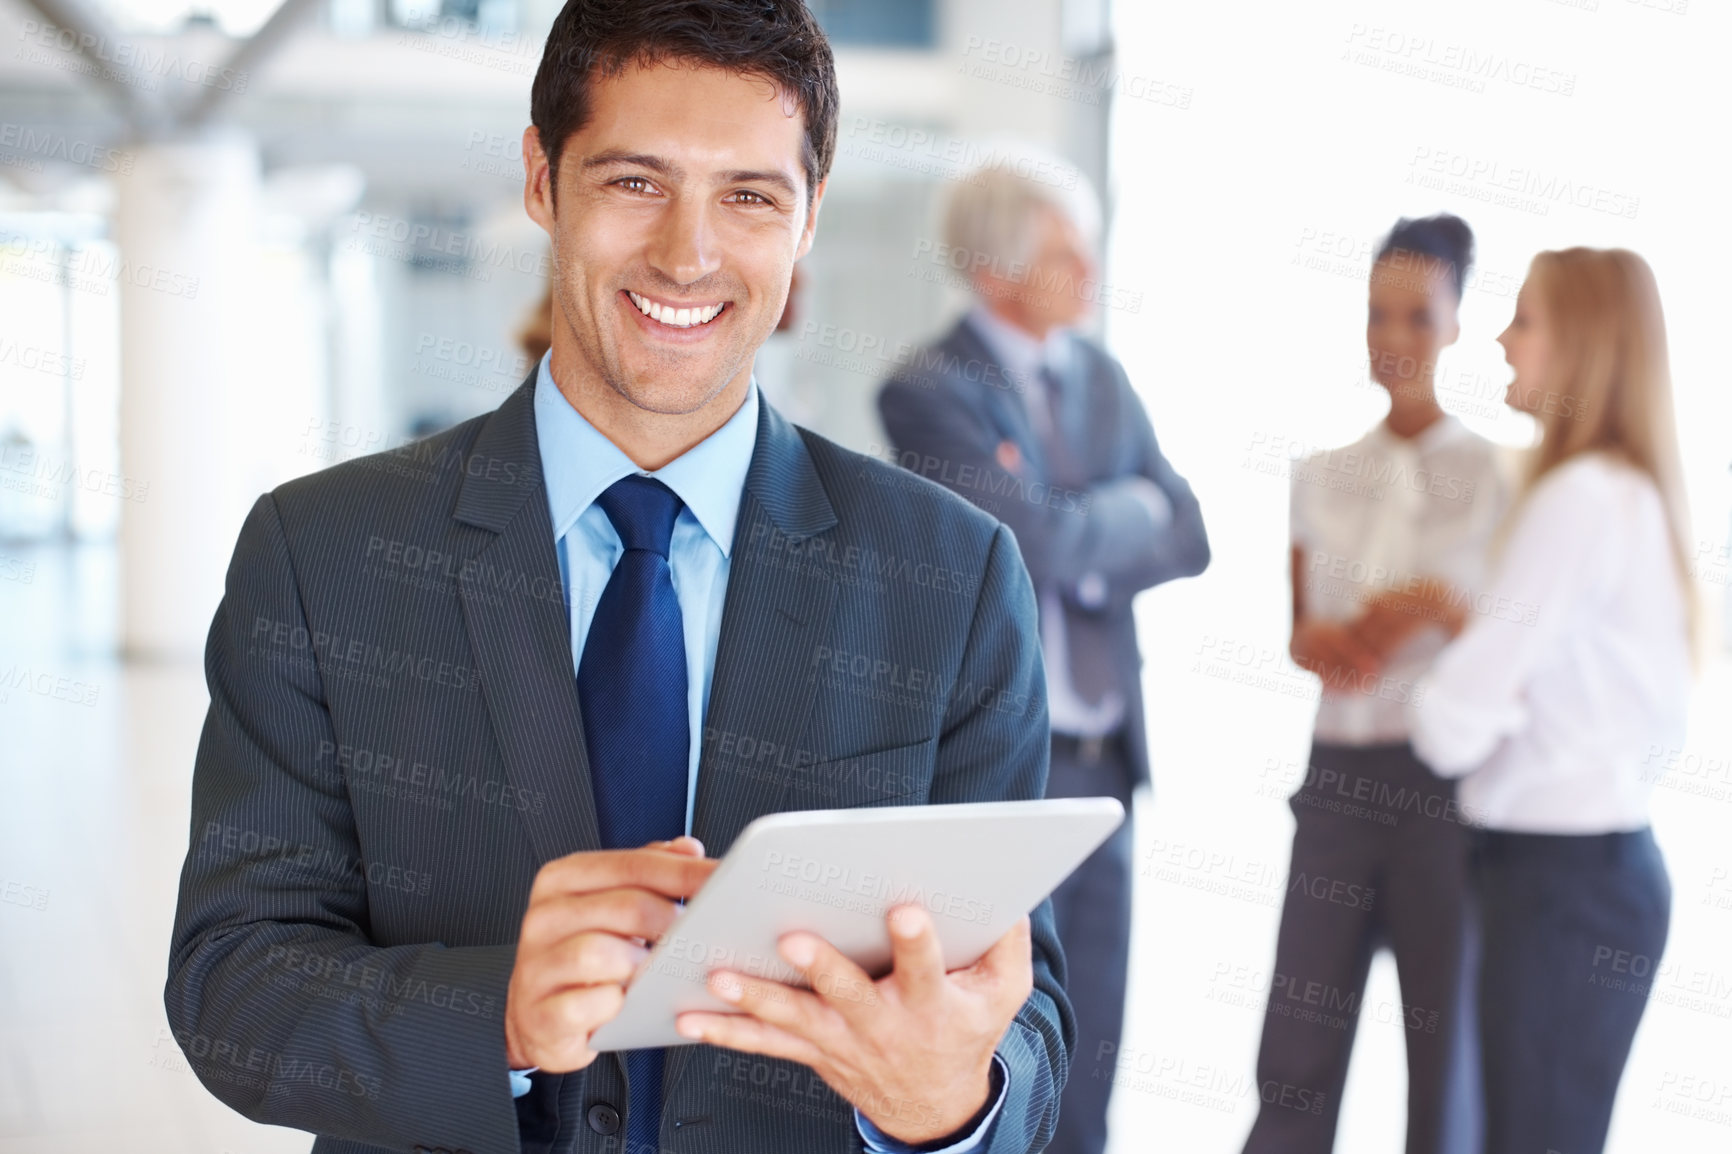 Buy stock photo Portrait of smiling young business man working on digital tablet with executives in background